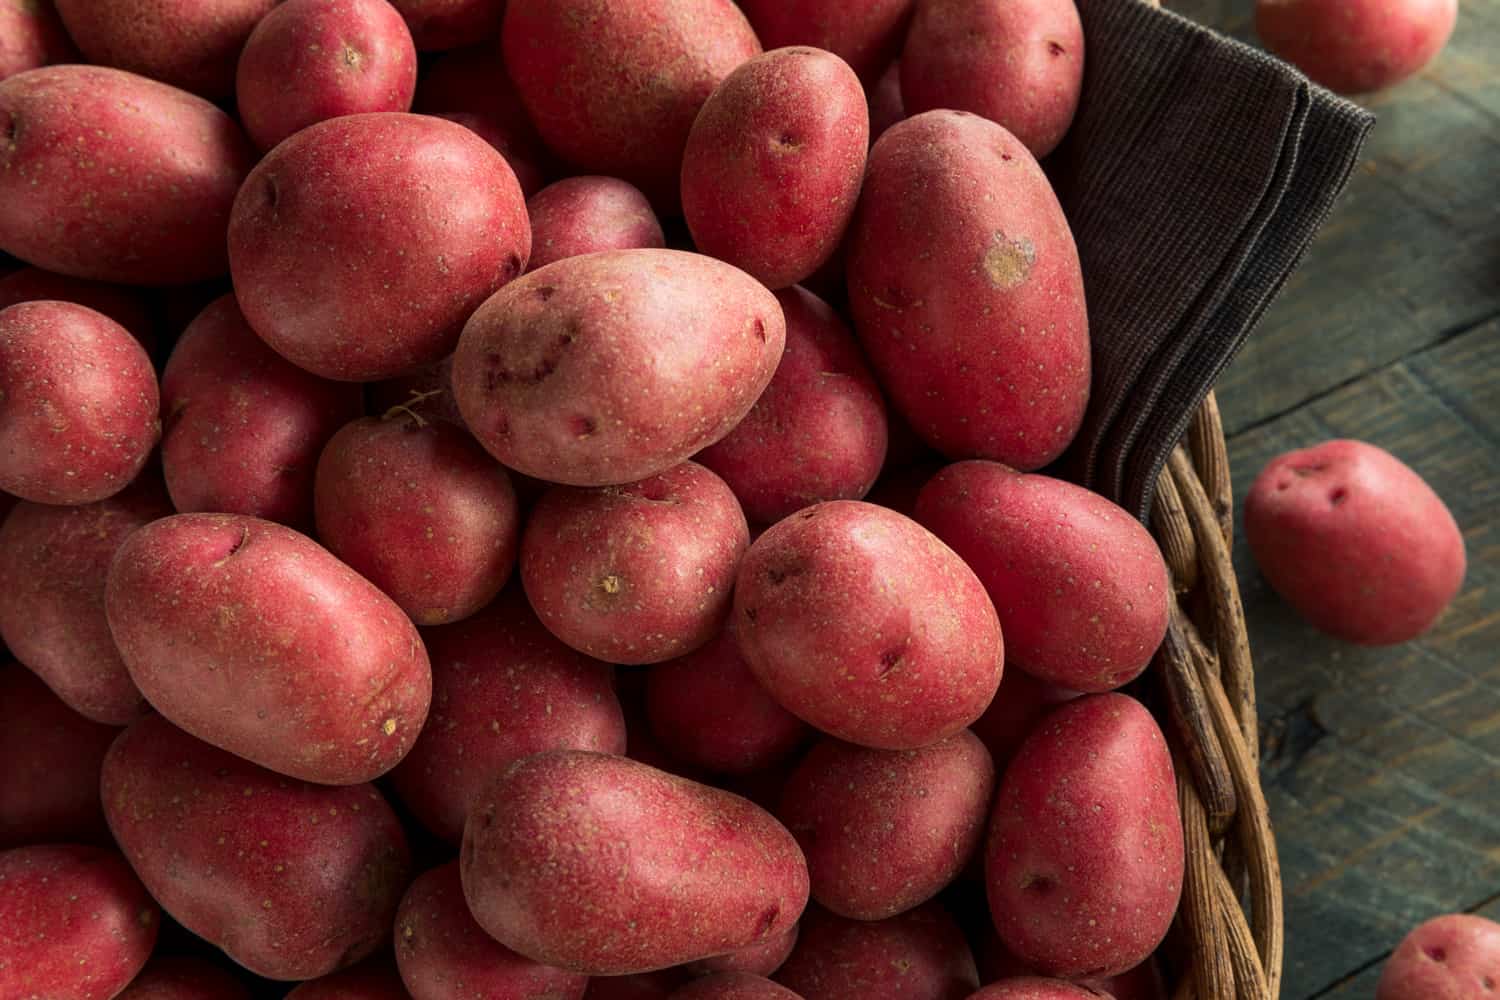 Raw Organic Red Potatoes Ready for Cooking